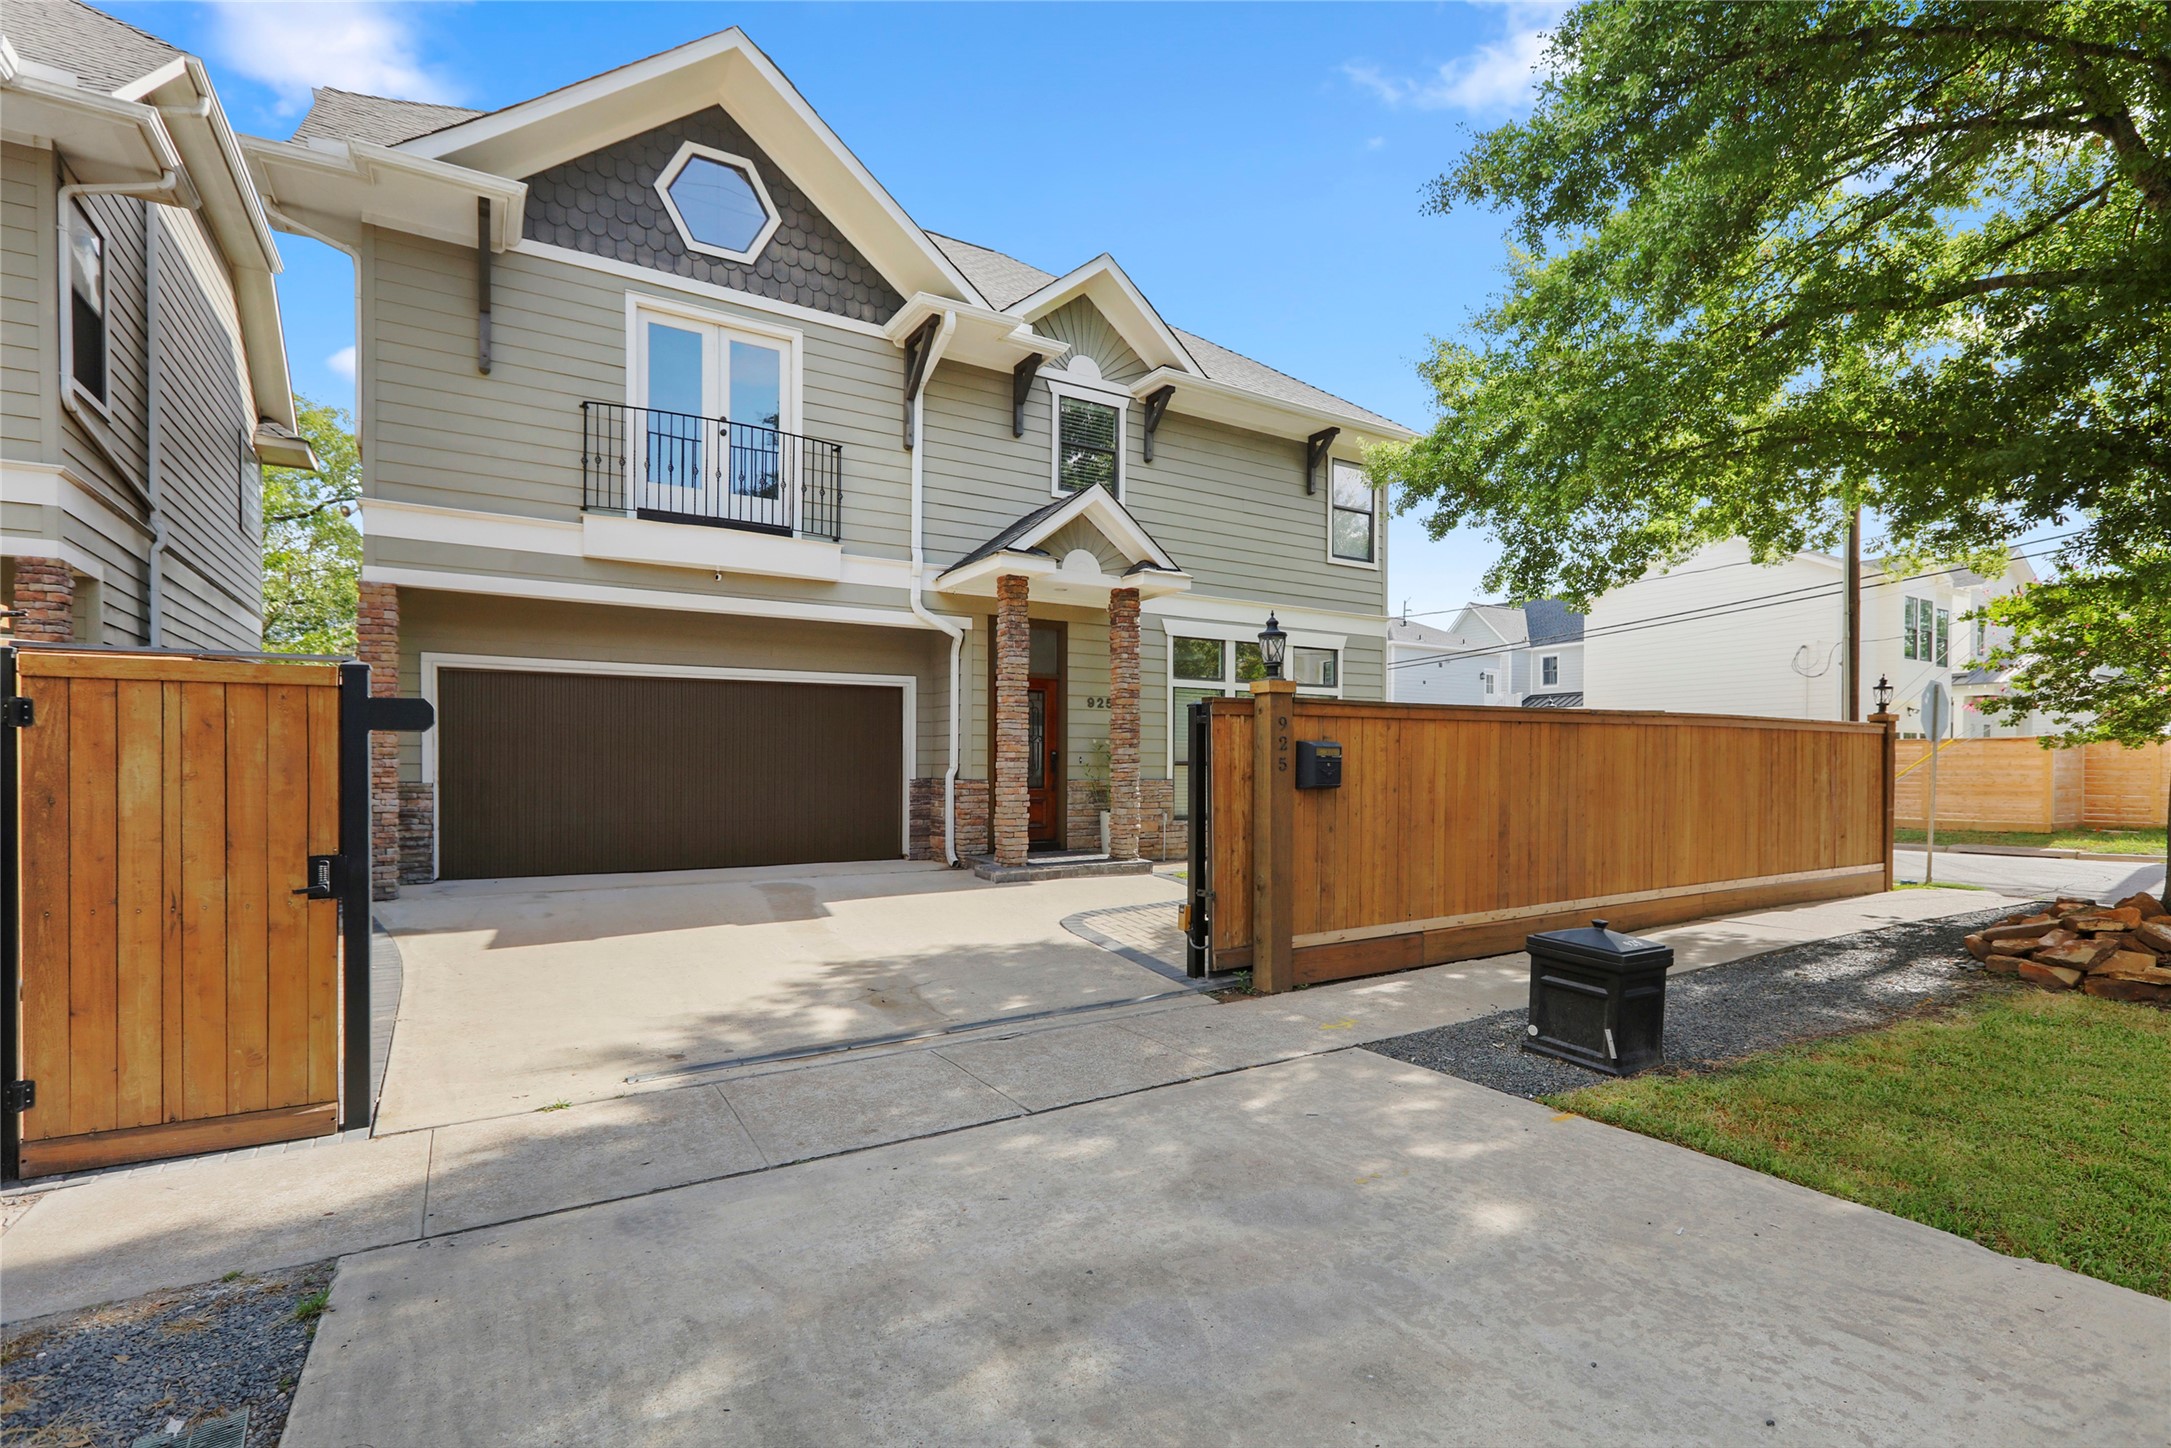 Welcome home, this is sought out neighborhood in the Heights. Automatic driveway gate with pedestrian gate with security code access. Garage has epoxy coating floors.